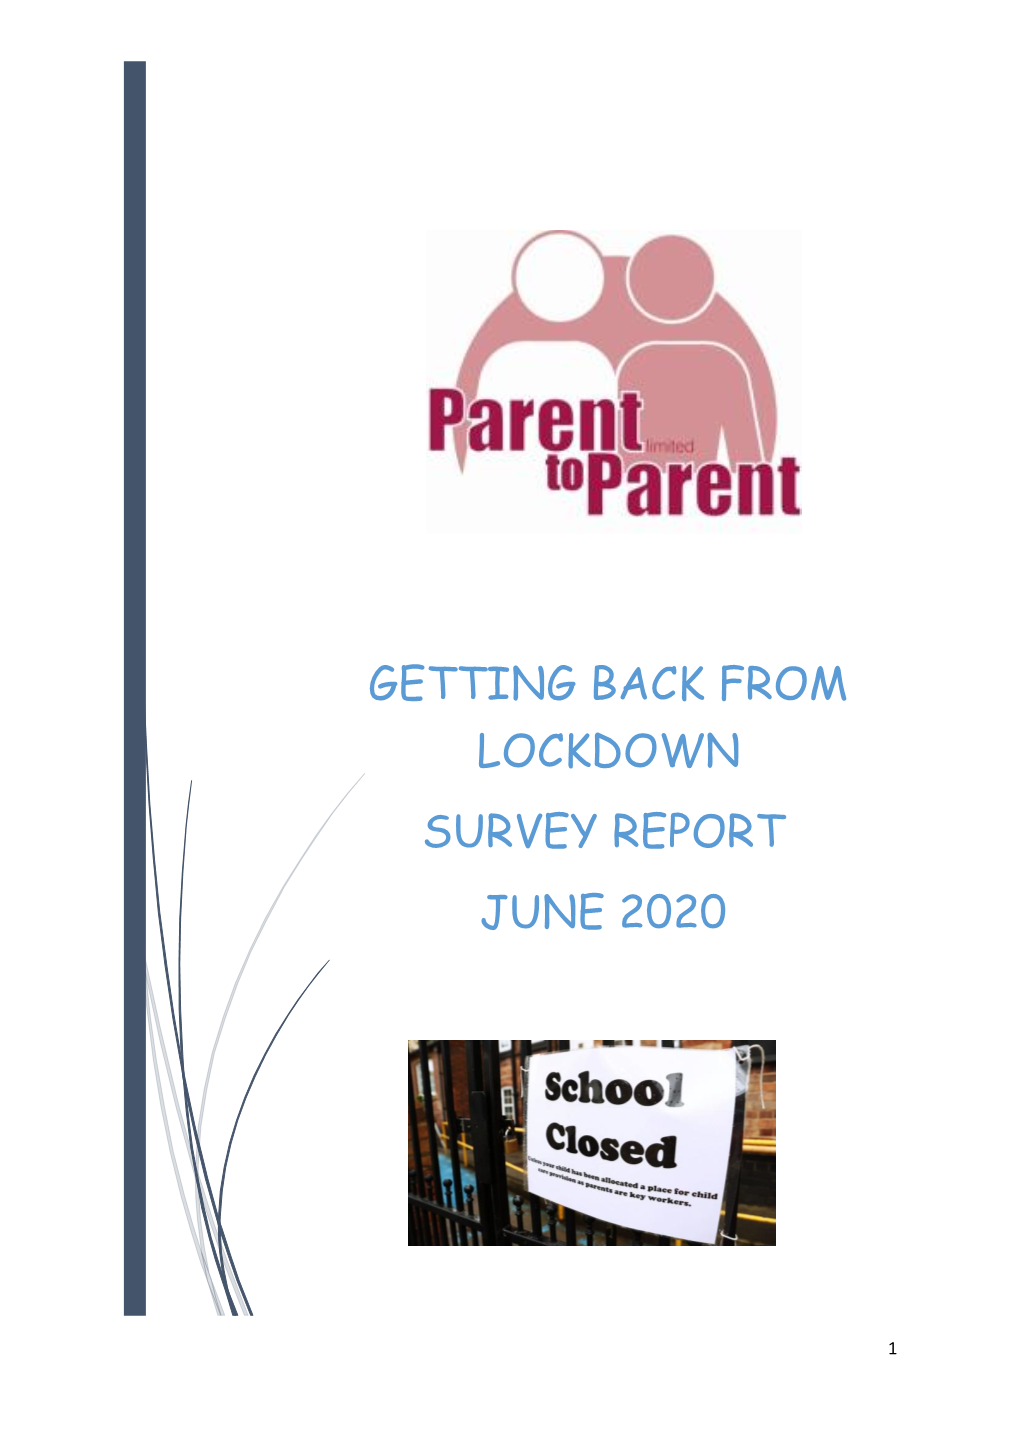 Getting Back from Lockdown Survey Report June 2020